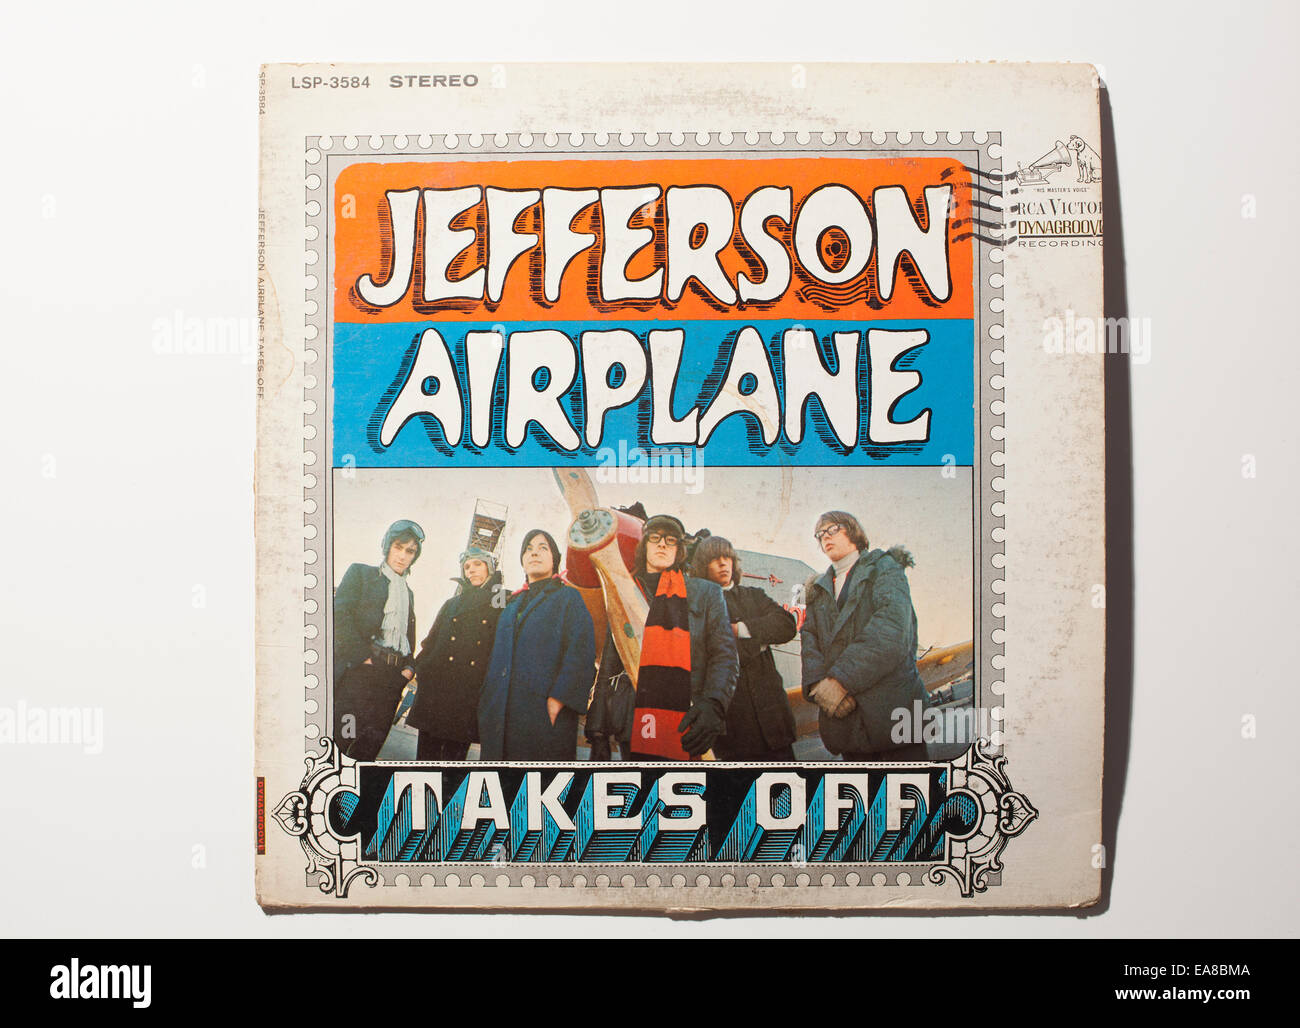 Vintage record album cover Jefferson Airplane Takes Off, released in 1966. Stock Photo